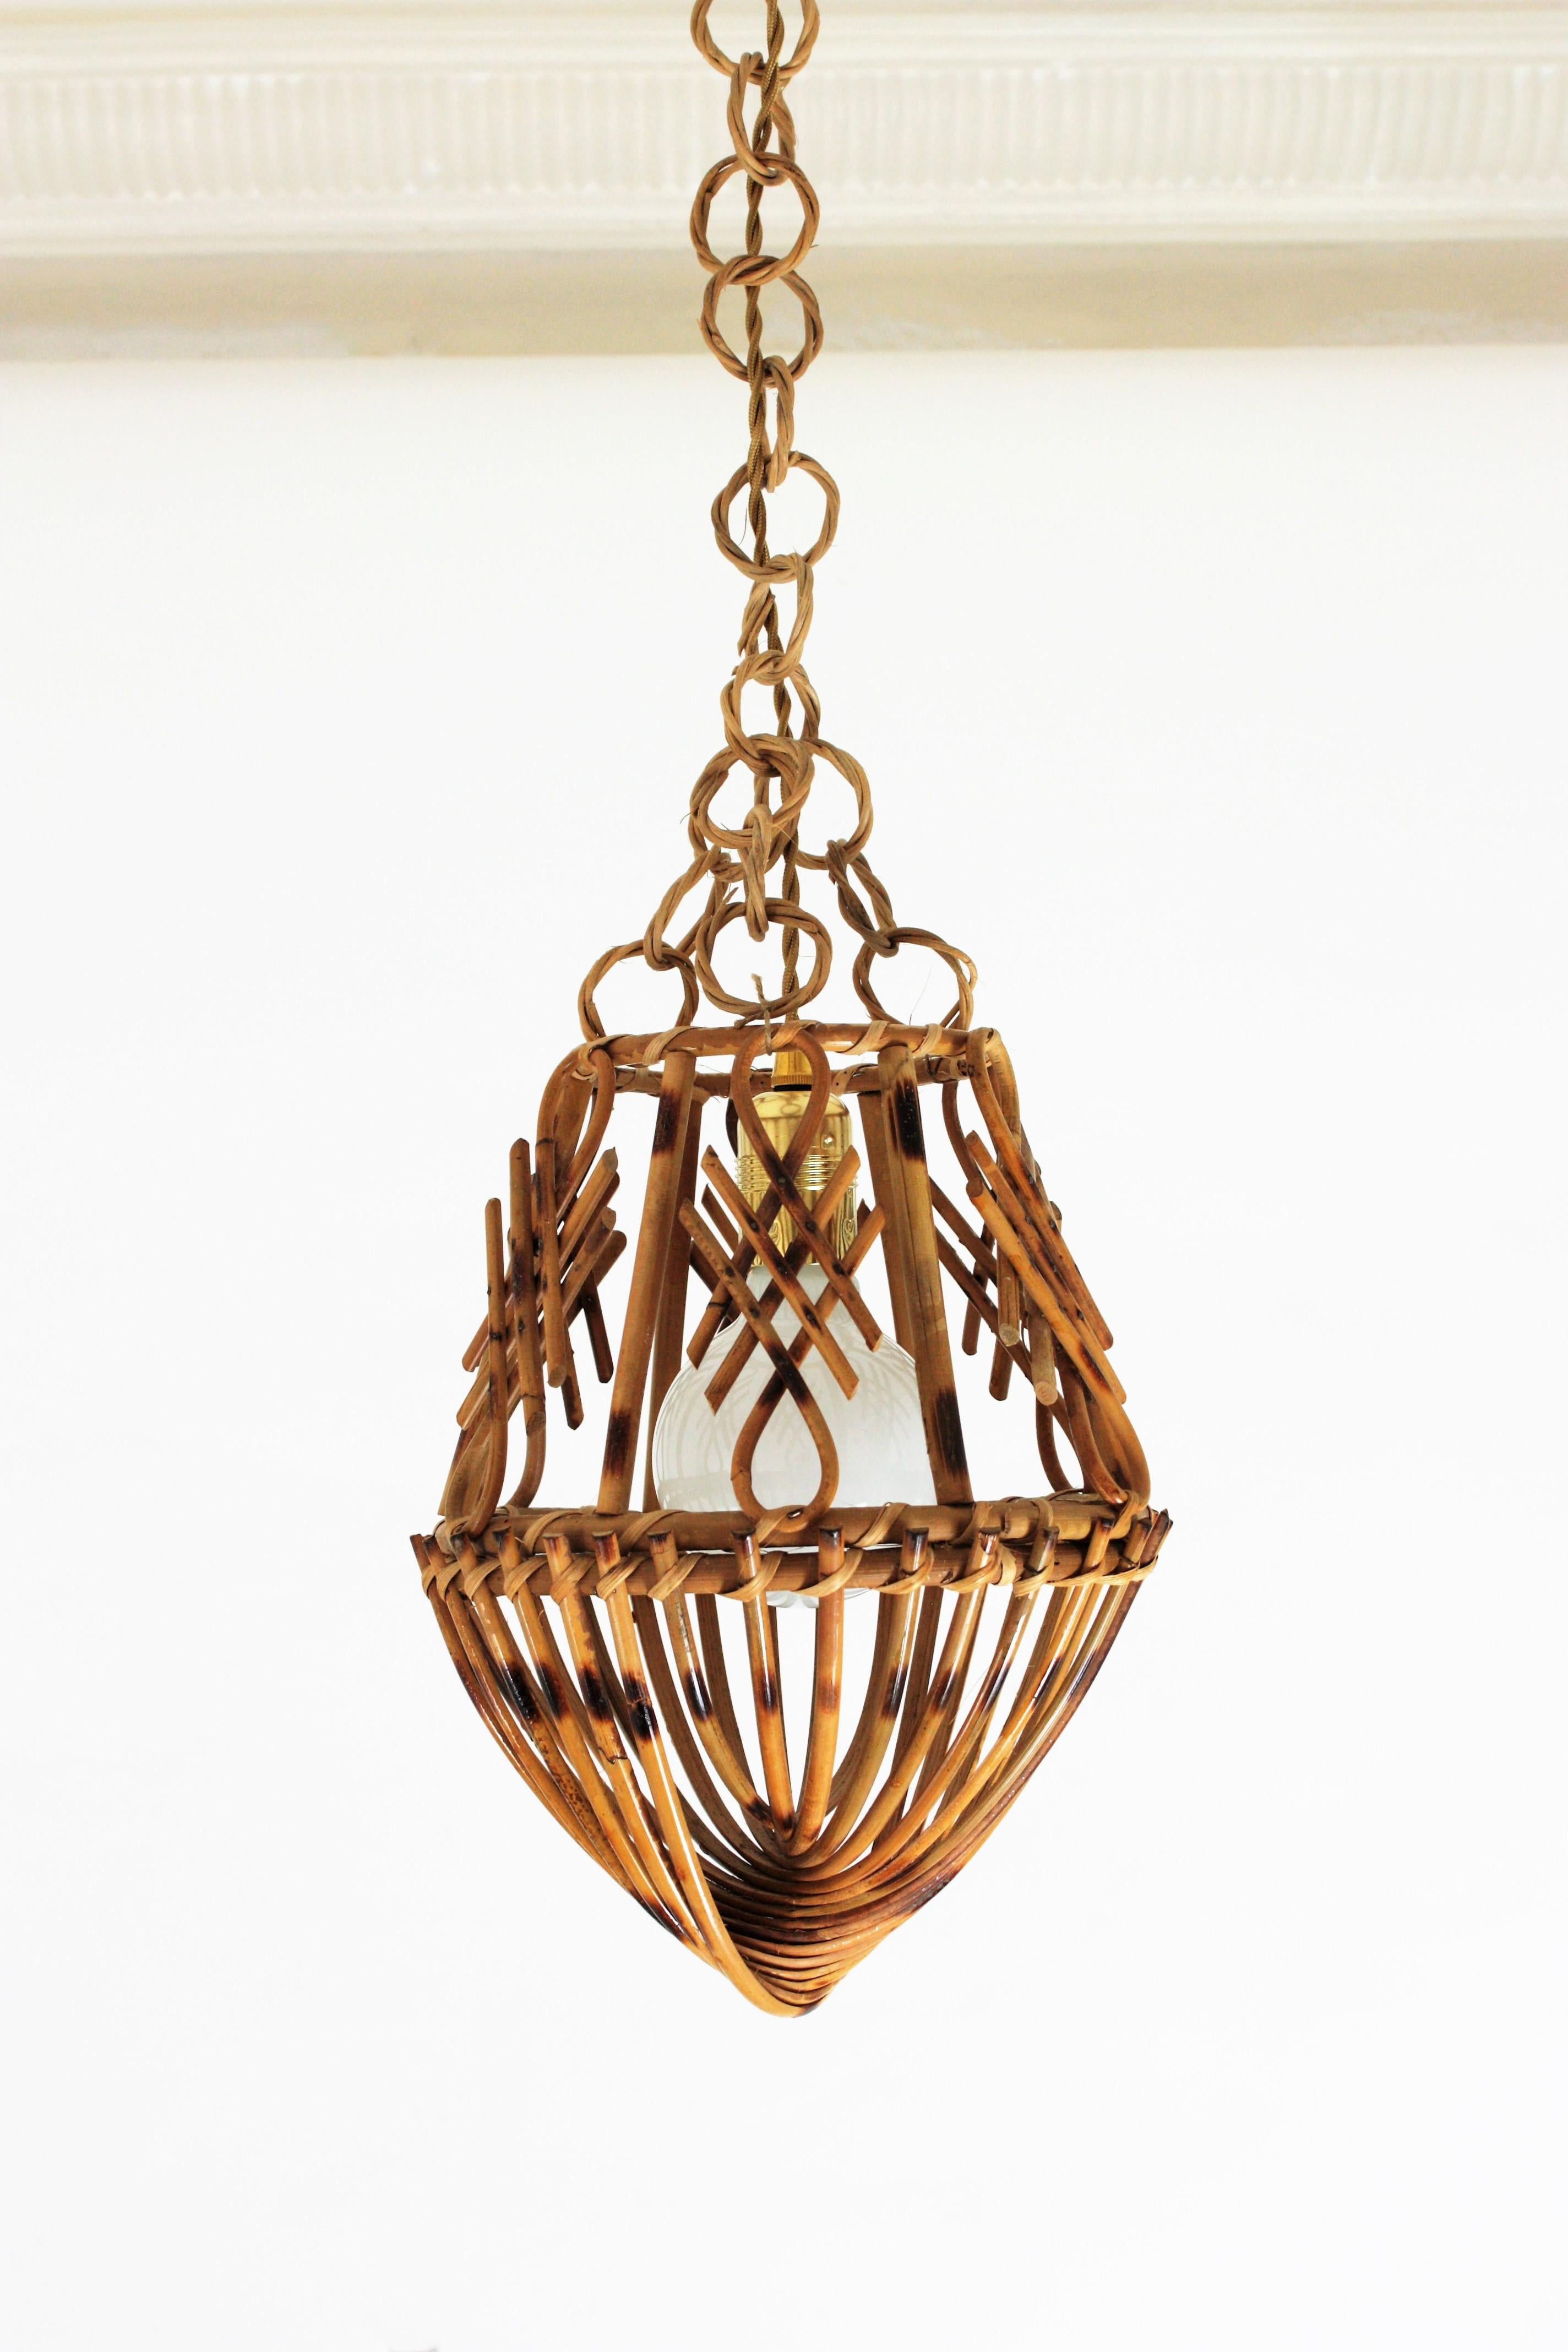 Bamboo Rattan French Modernist Pendant Lamp or Lantern with Chinoiserie Accents